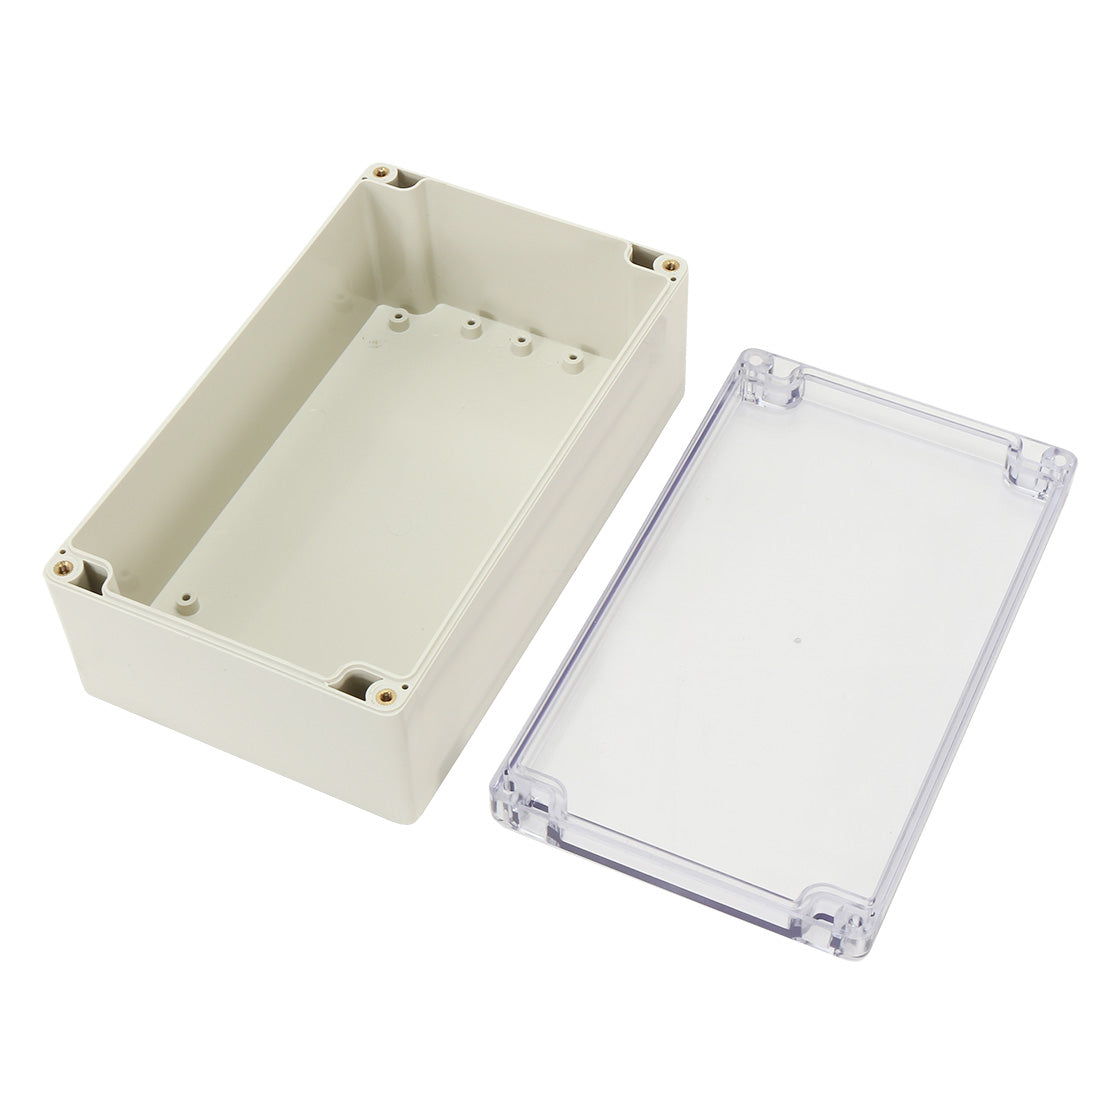 uxcell Uxcell 7.9"x4.7"x2.9"(200mmx120mmx75mm) ABS Junction Box Universal Project Enclosure w PC Transparent Cover